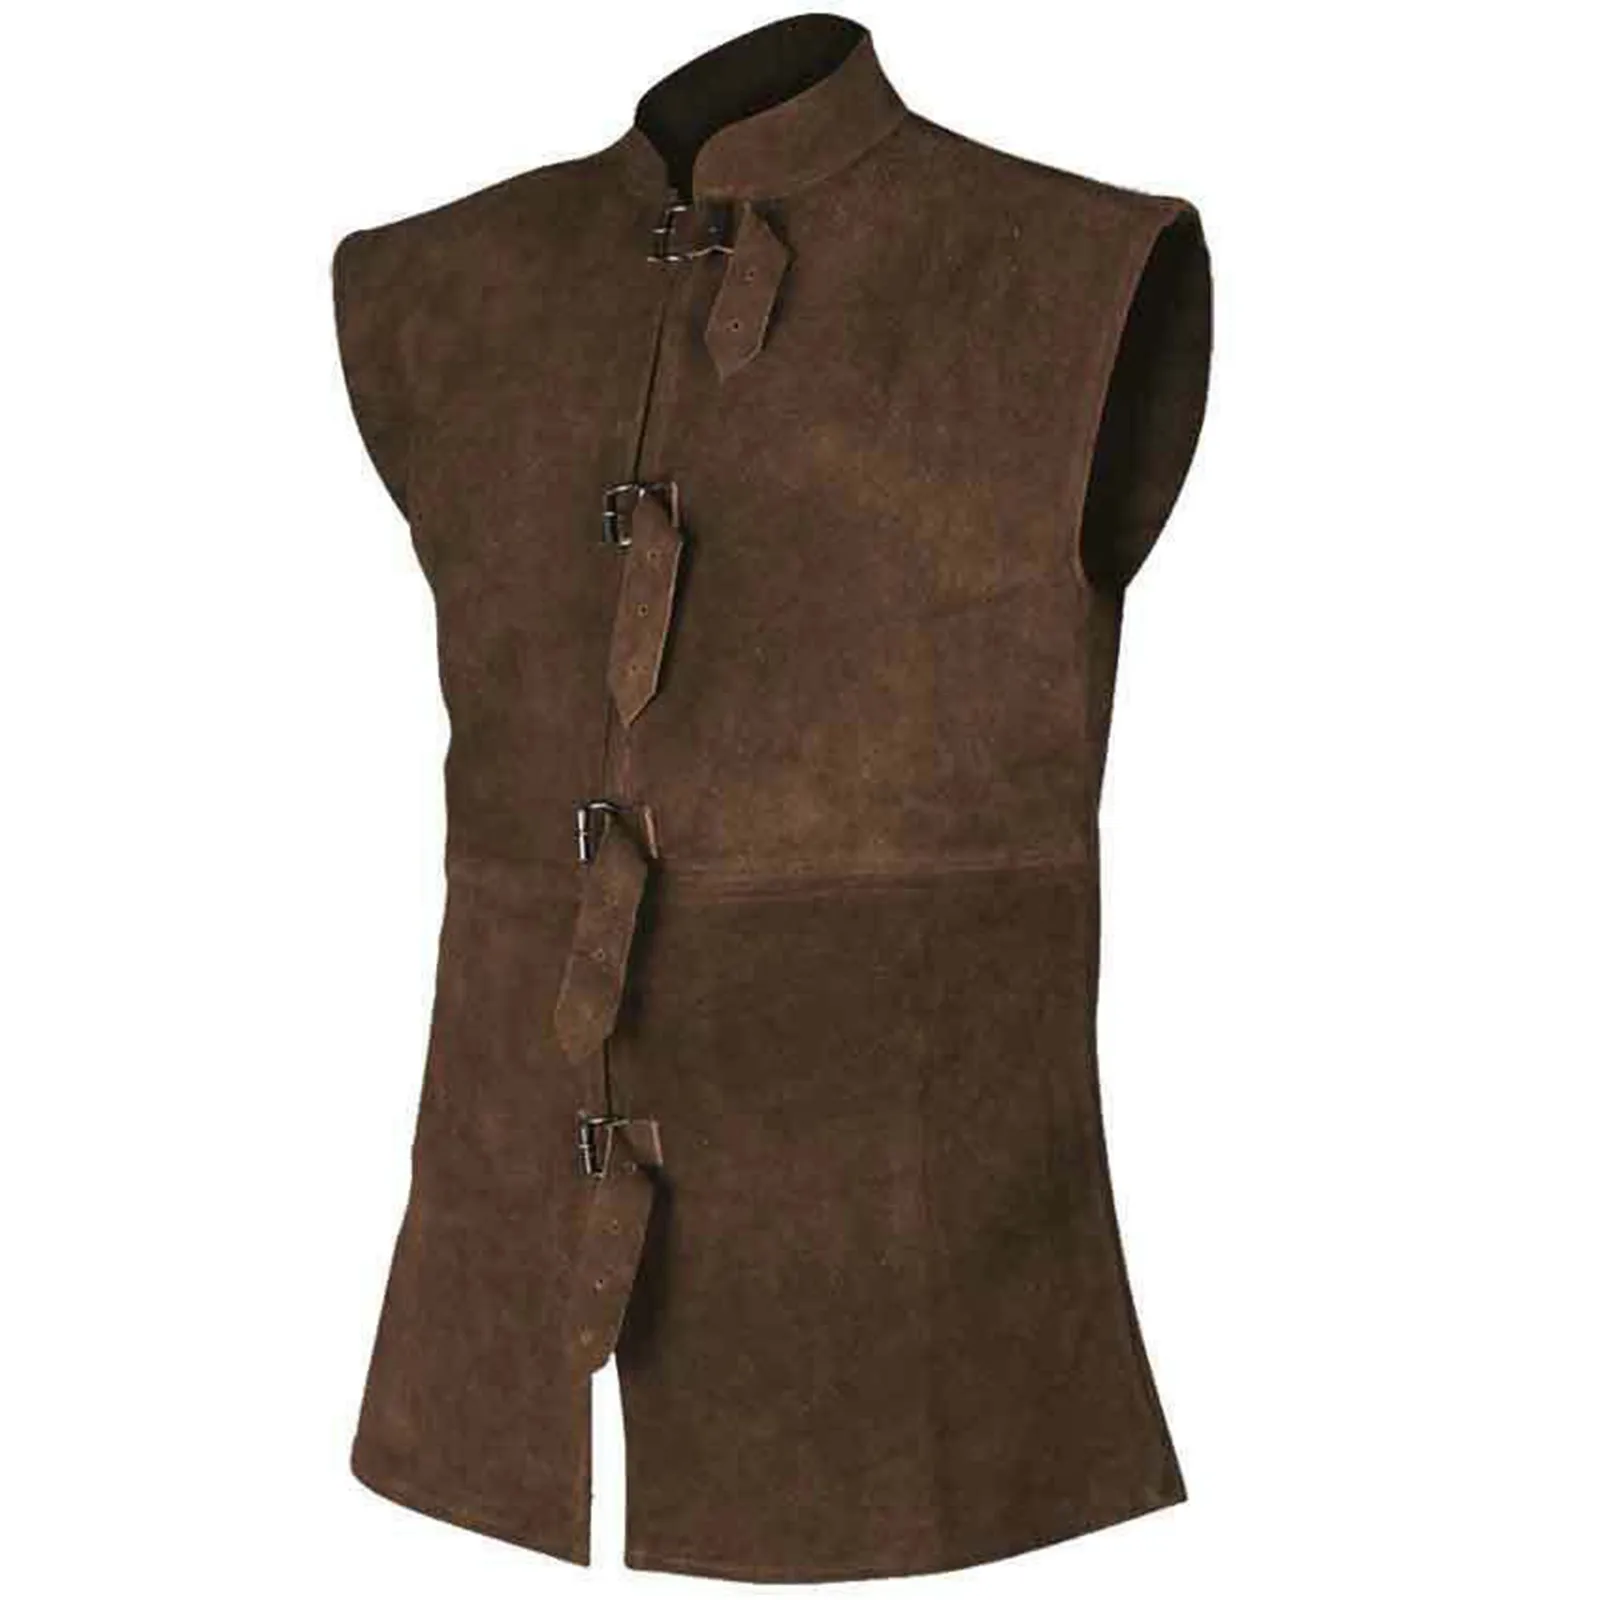 Vintage Suede Waistcoat Men Sleeveless Solid Color Stand-Up Collar Buttons Coat Vest Spring Autumn Medieval Retro Suit Vest Male t shirt pants popular male buttons neckline relaxed fit ankle tied pants t shirt for vacation top trousers t shirt pants